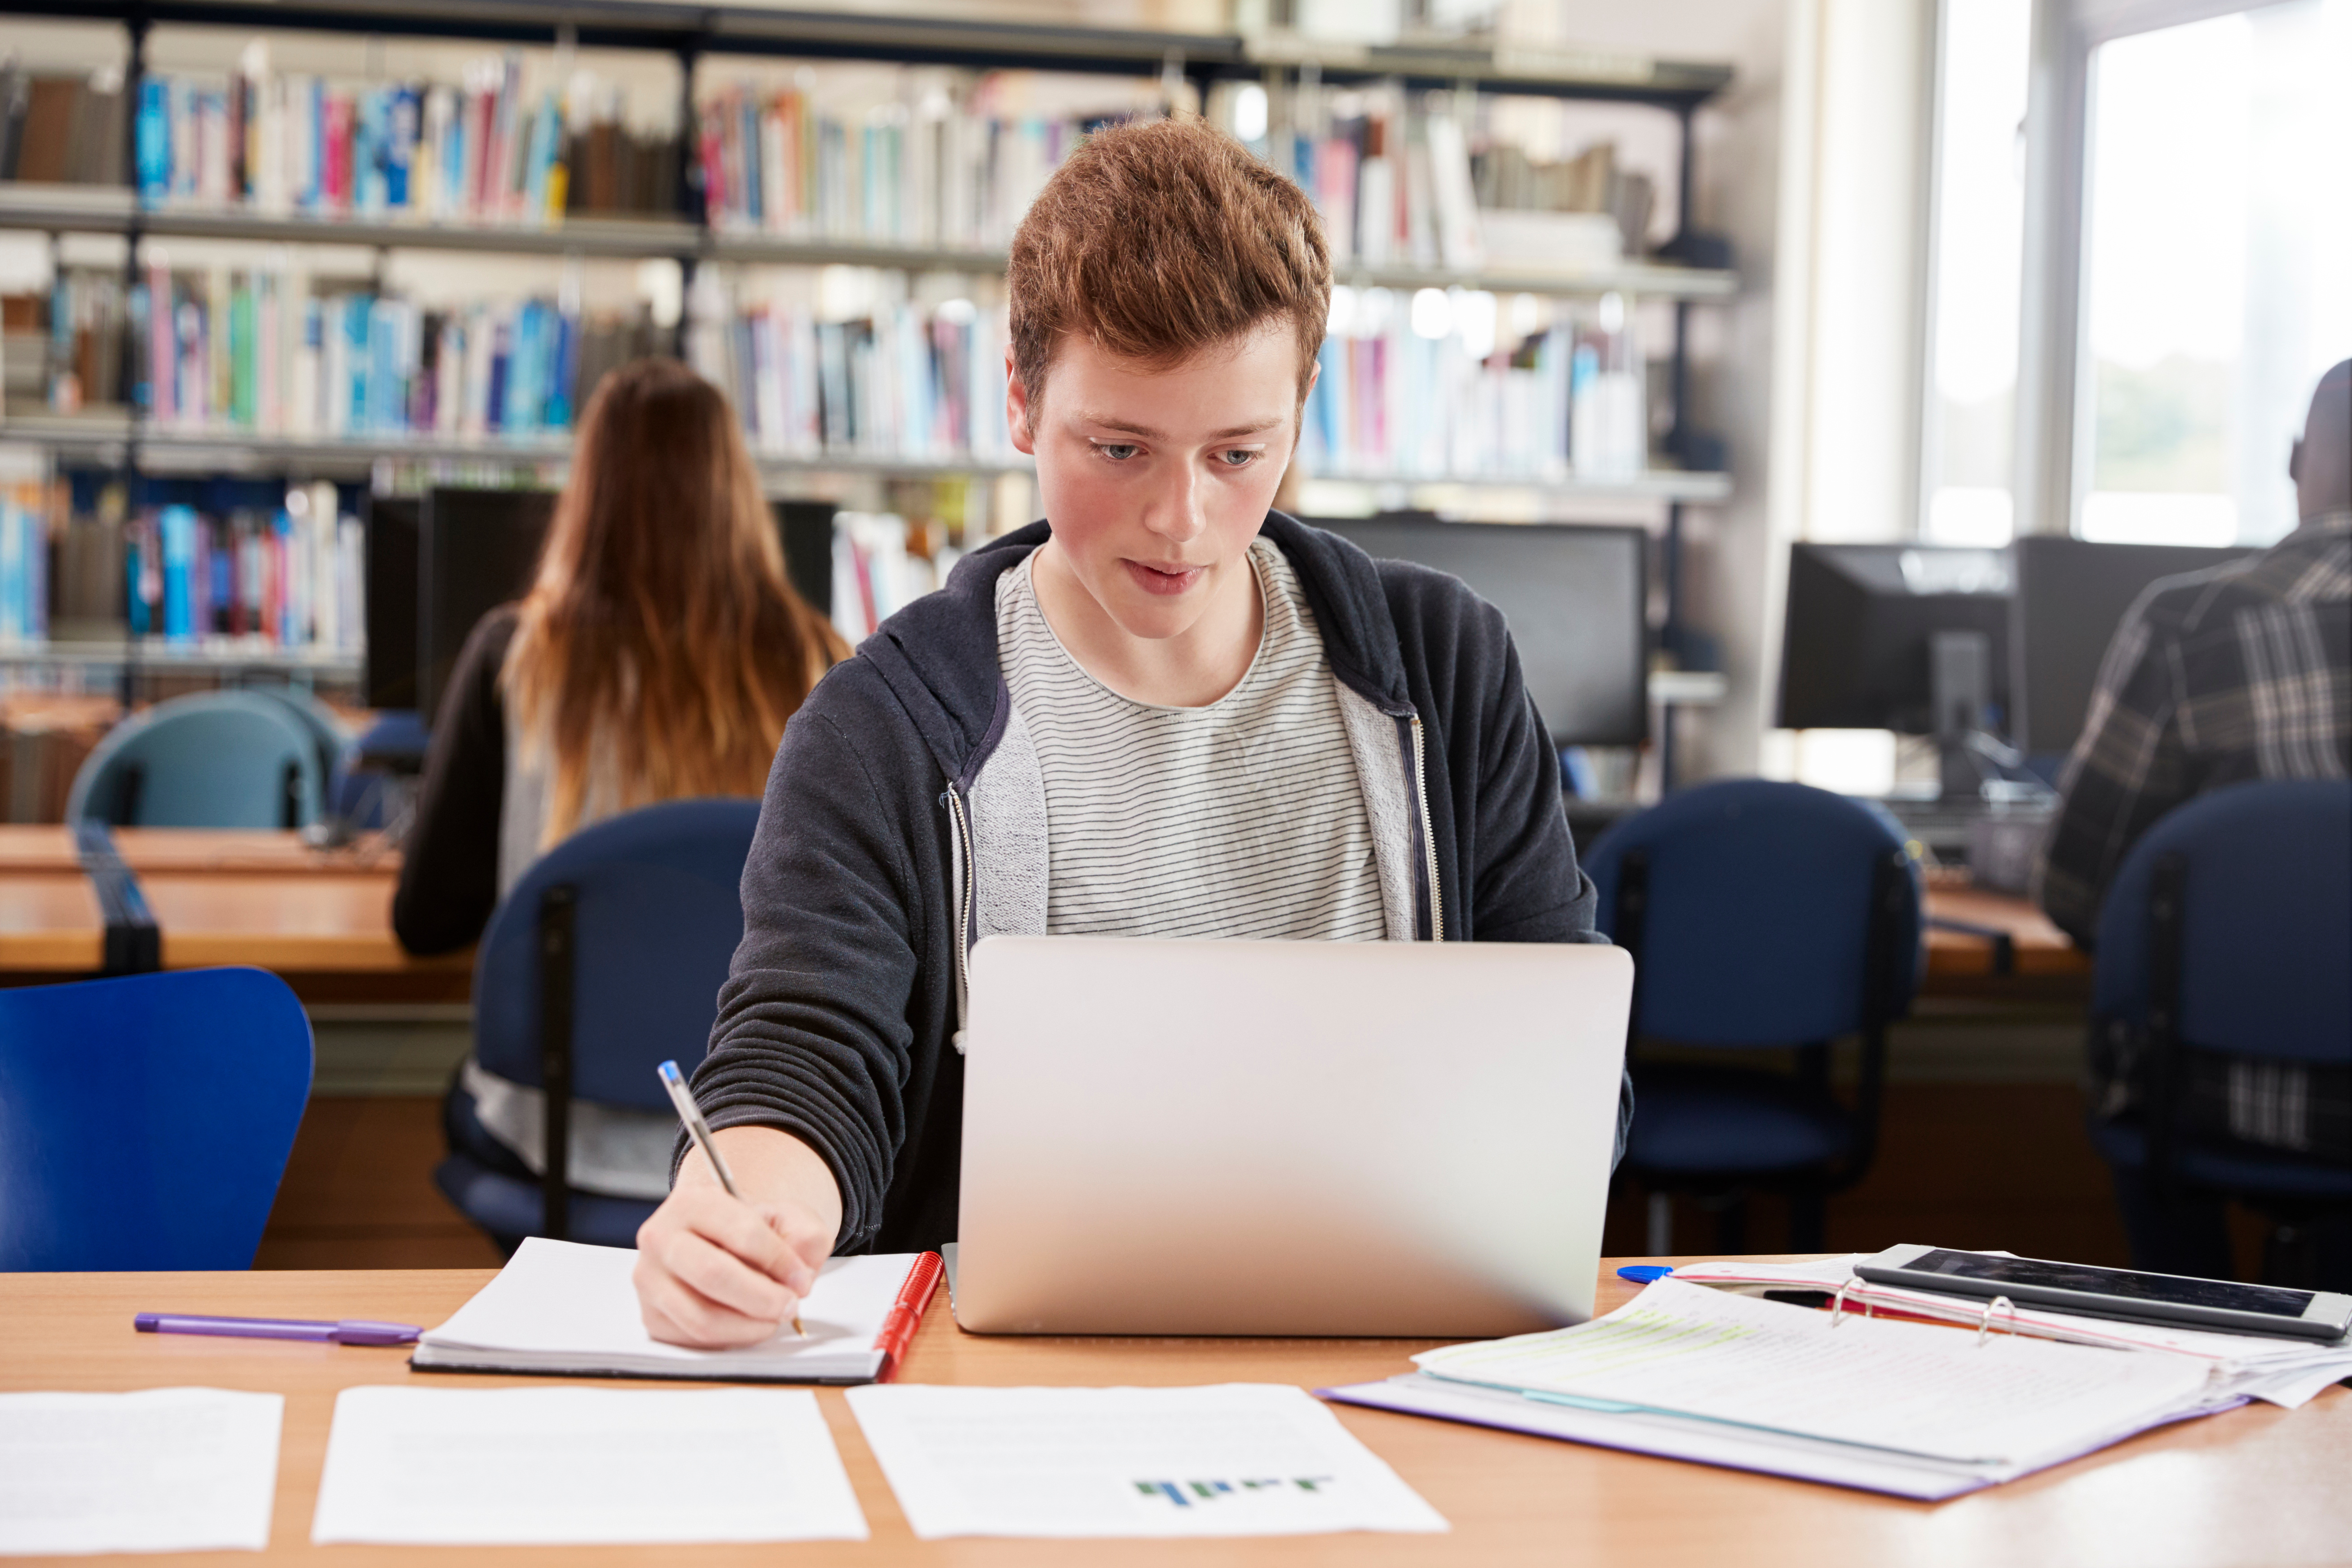 7 Tips to Help You Deal with Exam Stress